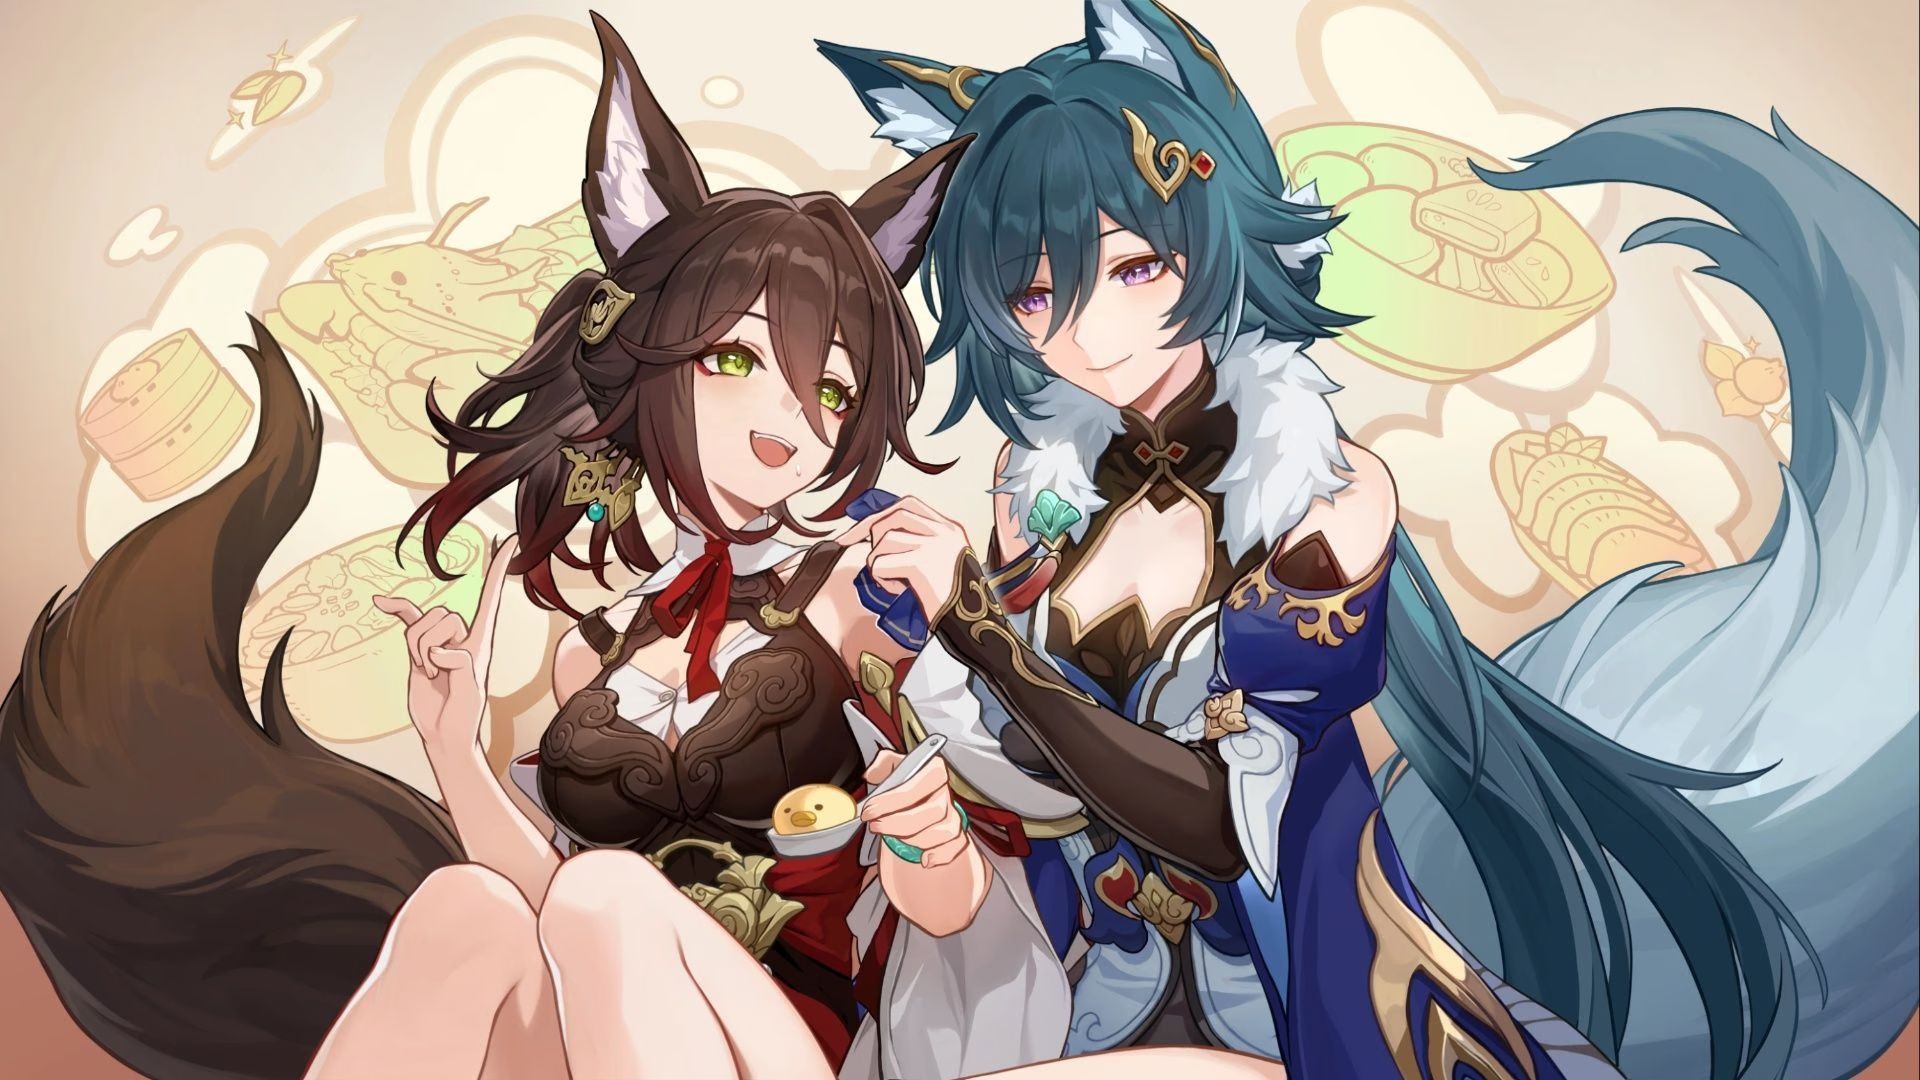 An official Honkai Star Rail art featuring Yukong to the right and Tingyun to the left. Yukong is holding up a handkerchief to wipe Tingyun's mouth, which is dirty from the food she is eating with her spoon.